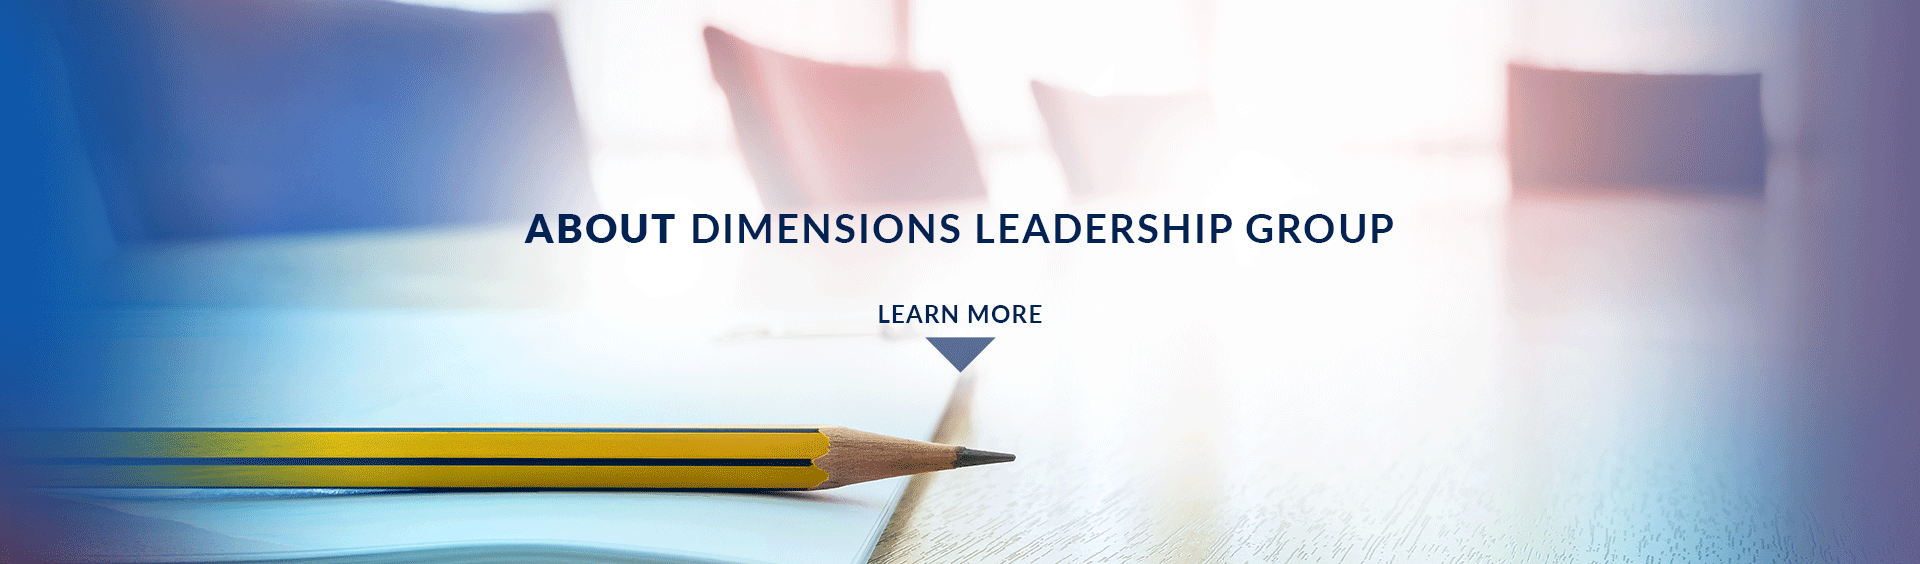 Learn more about Dimensions Leadership Group